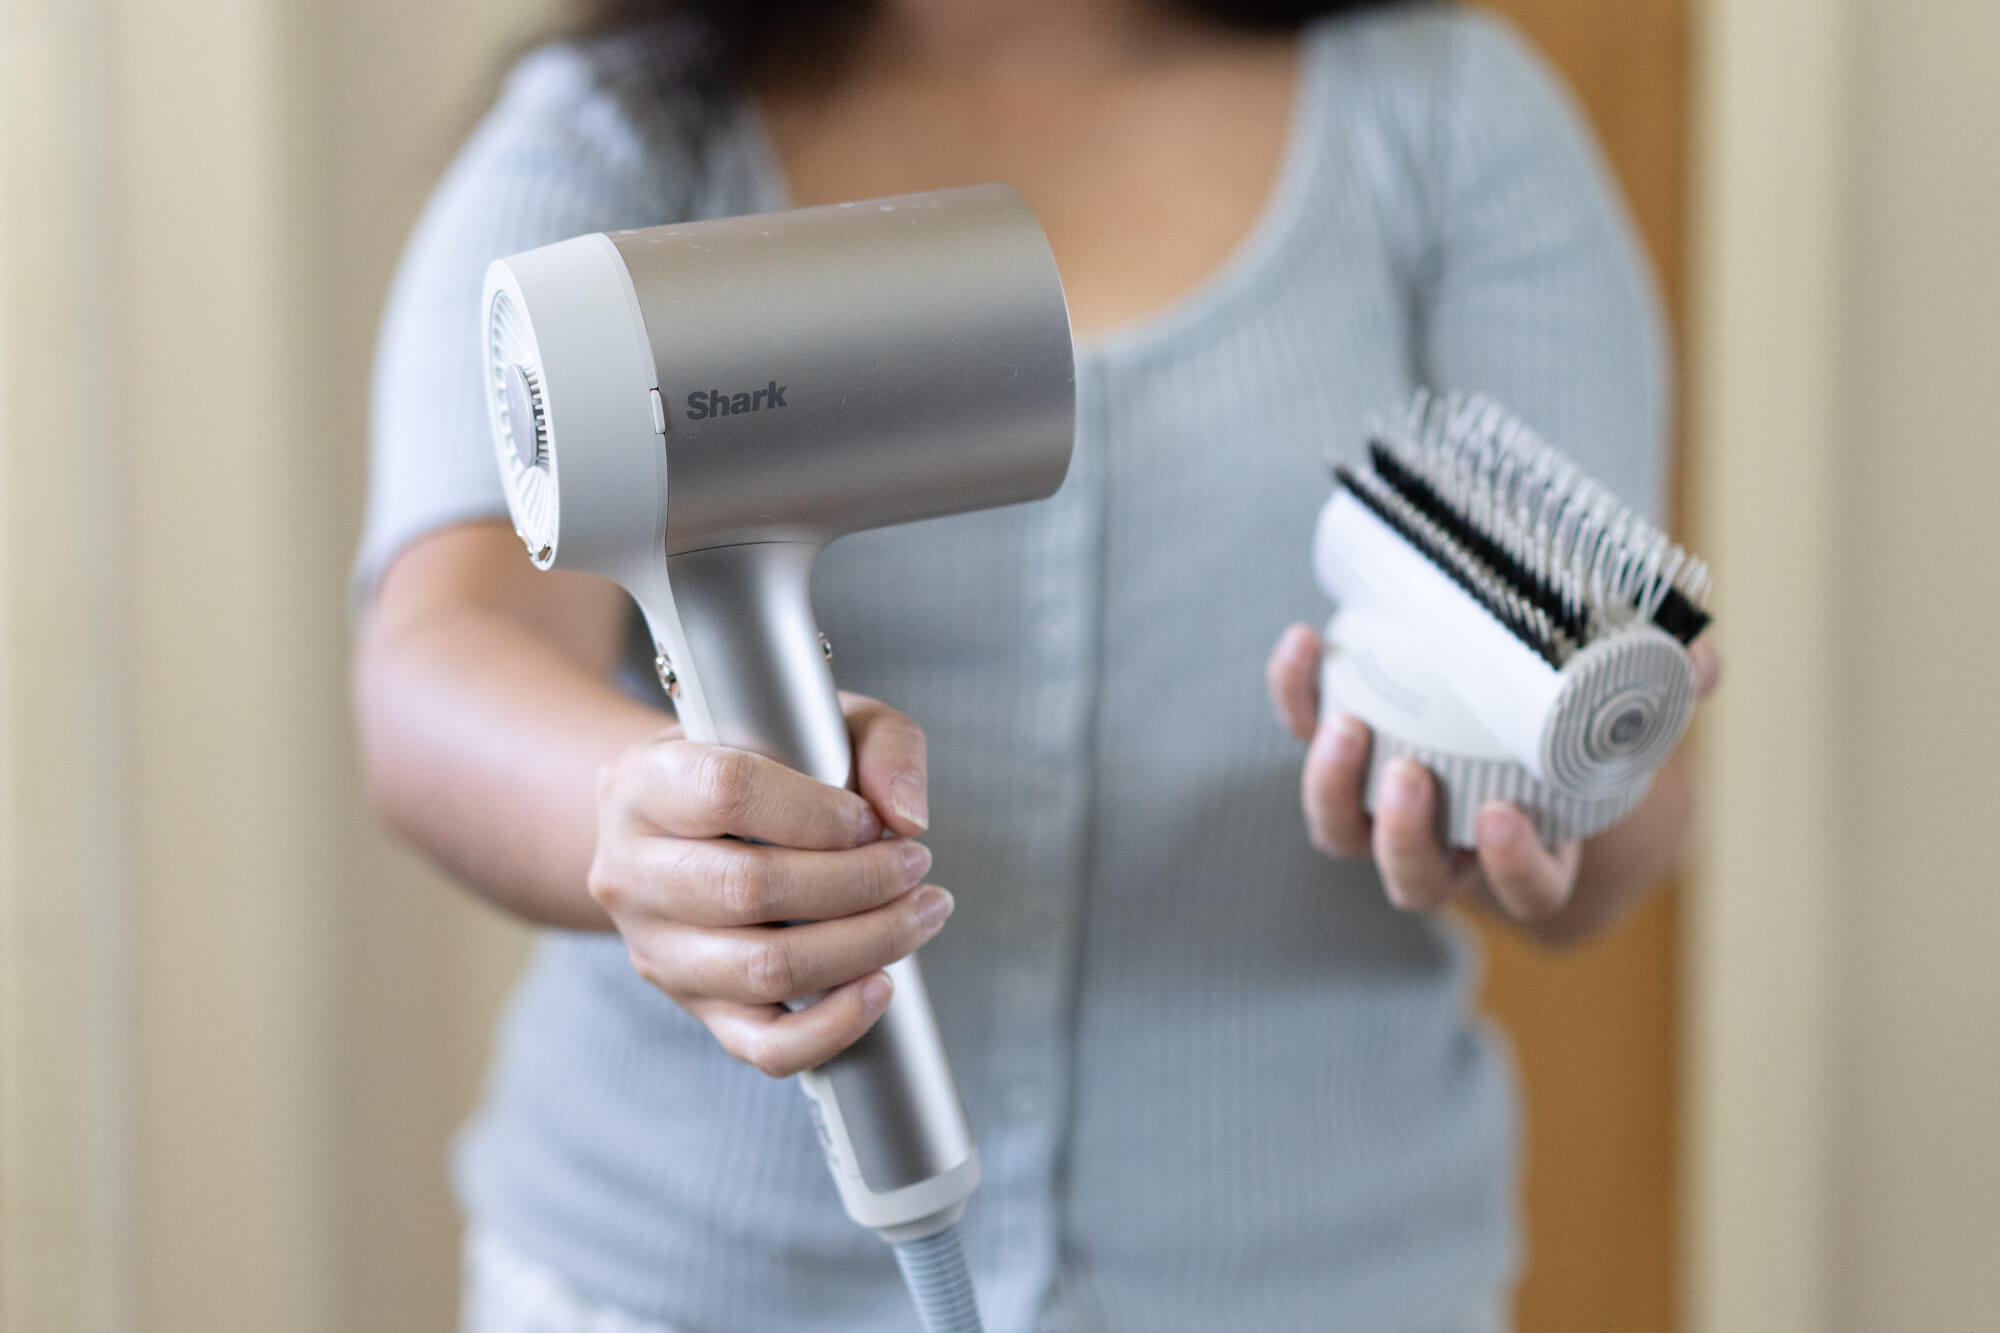 Shark hair dryer and attachment